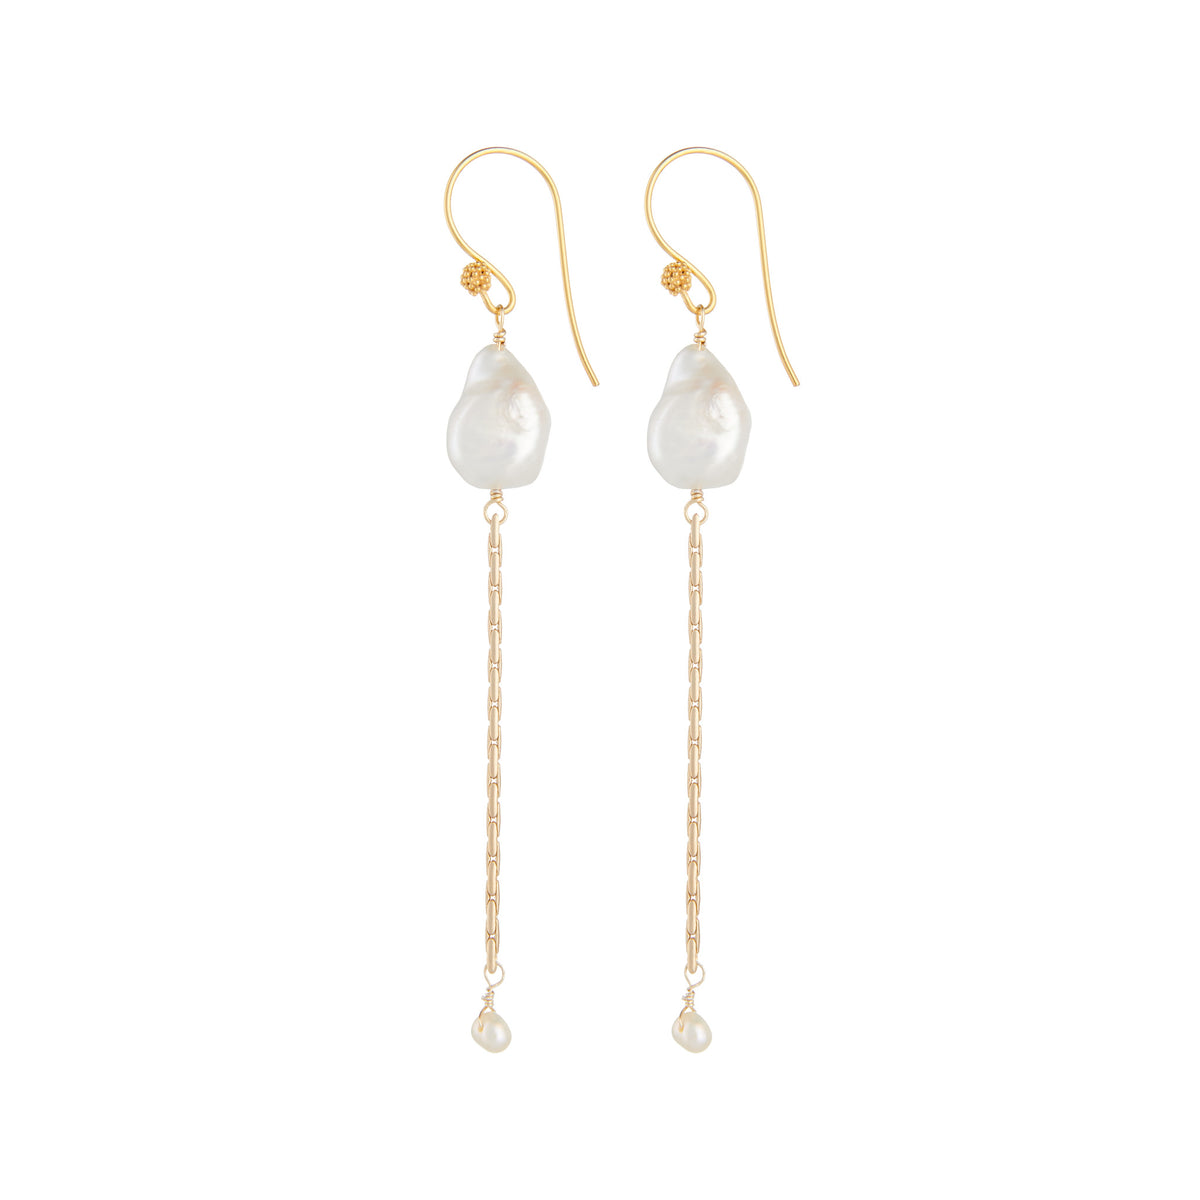 Slinky matte gold chain earrings with baroque pearls by vivien walsh